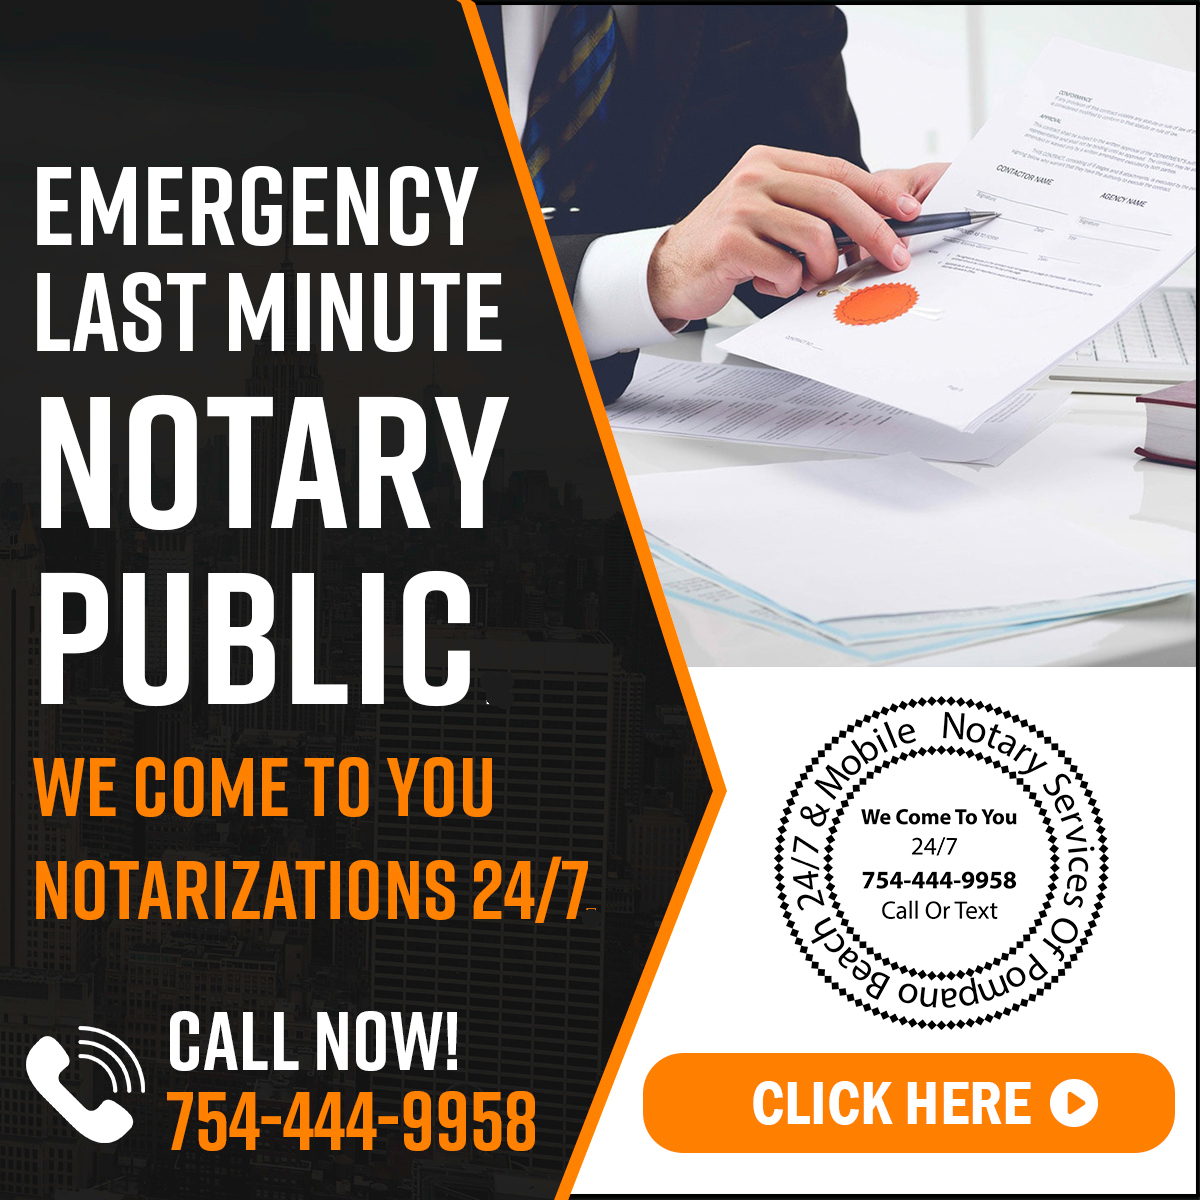 Emergency Notary Public Services Last Minute